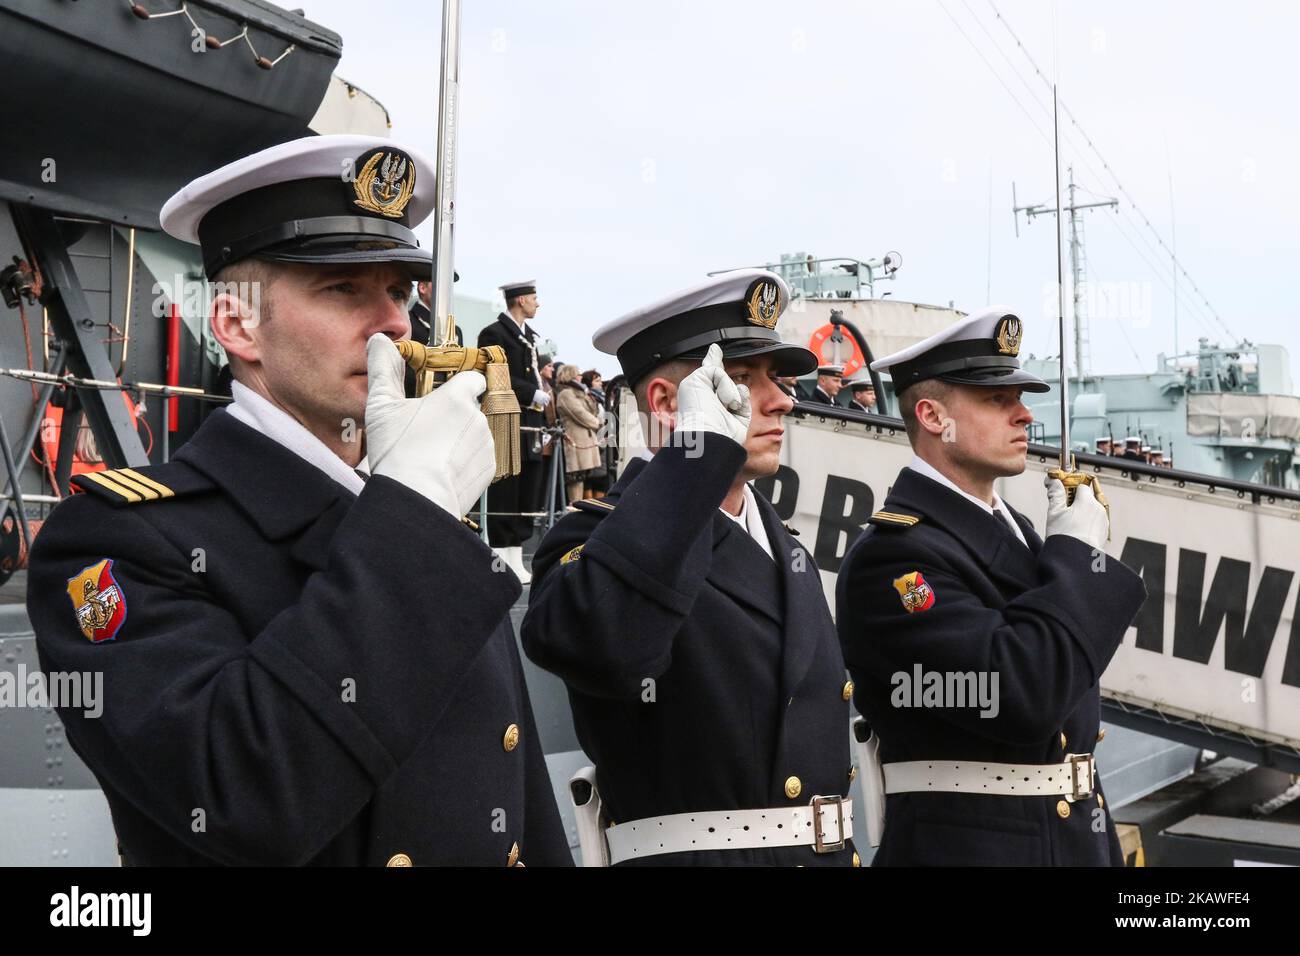 Navy soldiers are seen in Gdynia, Poland on 9 February 2018 Volunteers to serve in the army, after a period of learning to drill, military ceremonies and military discipline, officially filed a military oath and began specialist training. The families of new soldiers also took part in the ceremony. (Photo by Michal Fludra/NurPhoto) Stock Photo